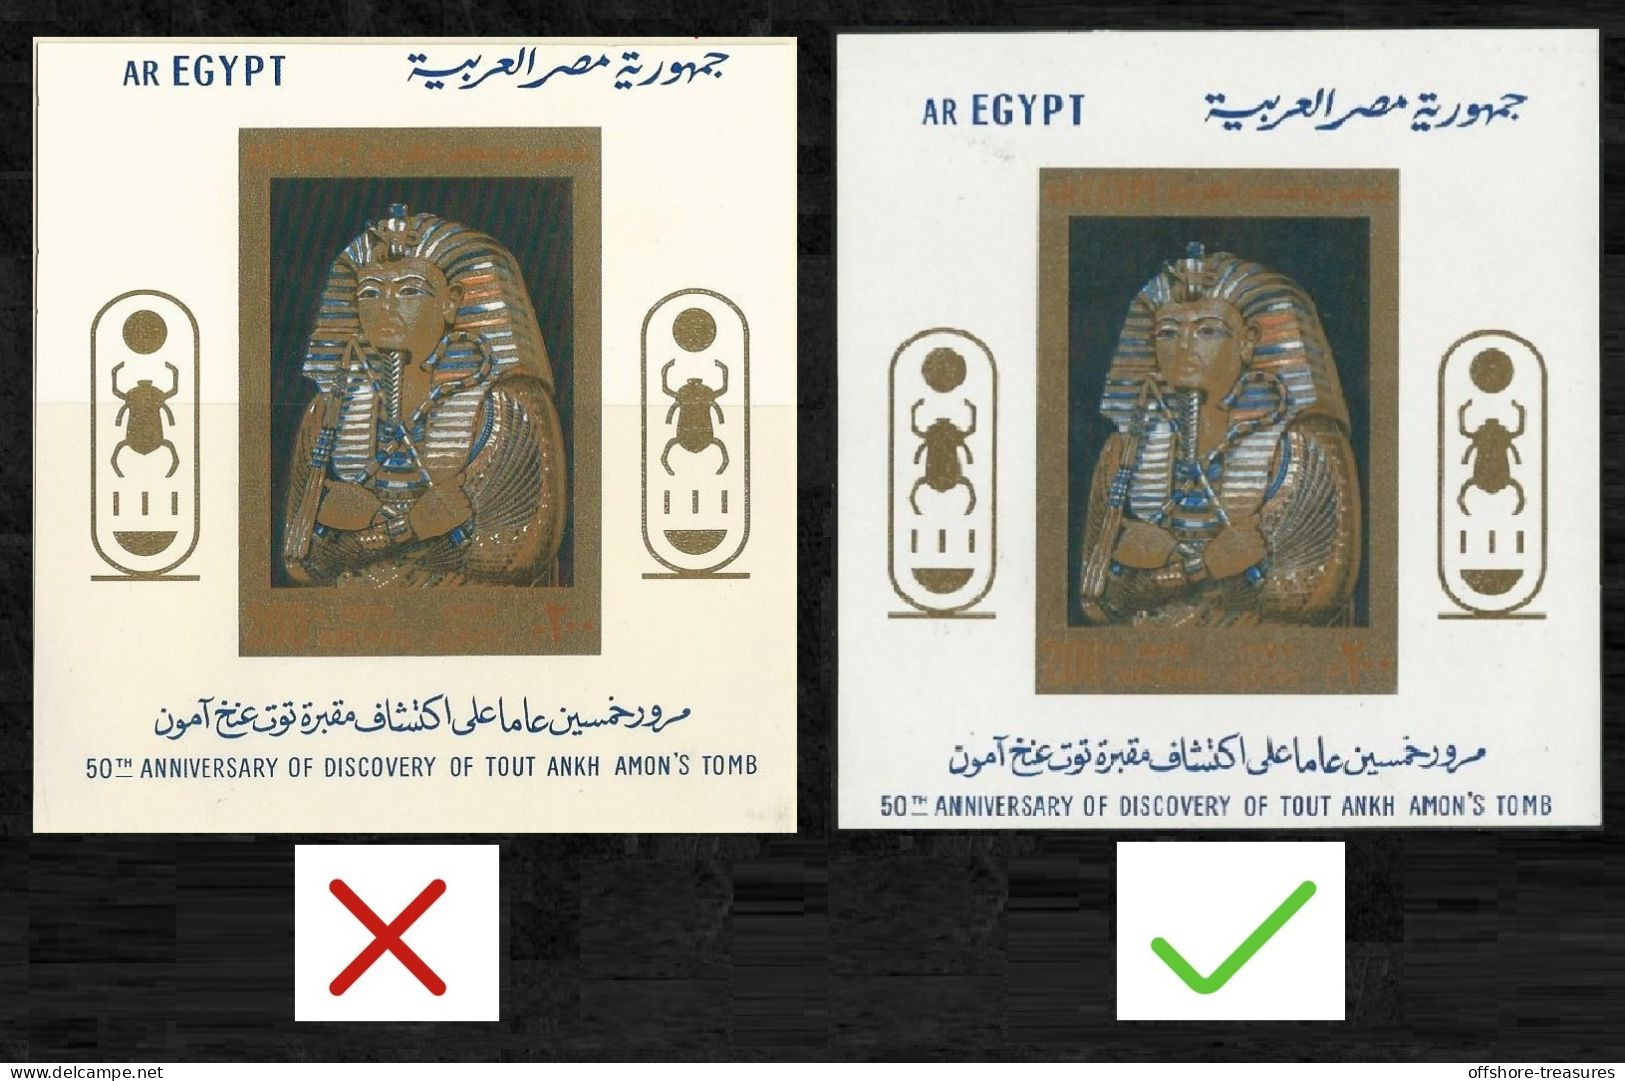 EGYPT 1922 - 1972  KING TUT SOUVENIR SHEET ERROR WRONG CUT - TOMB DISCOVERY 50 YEARS ANNIVERSARY - KING TOUT ANKH AMON - Lettres & Documents